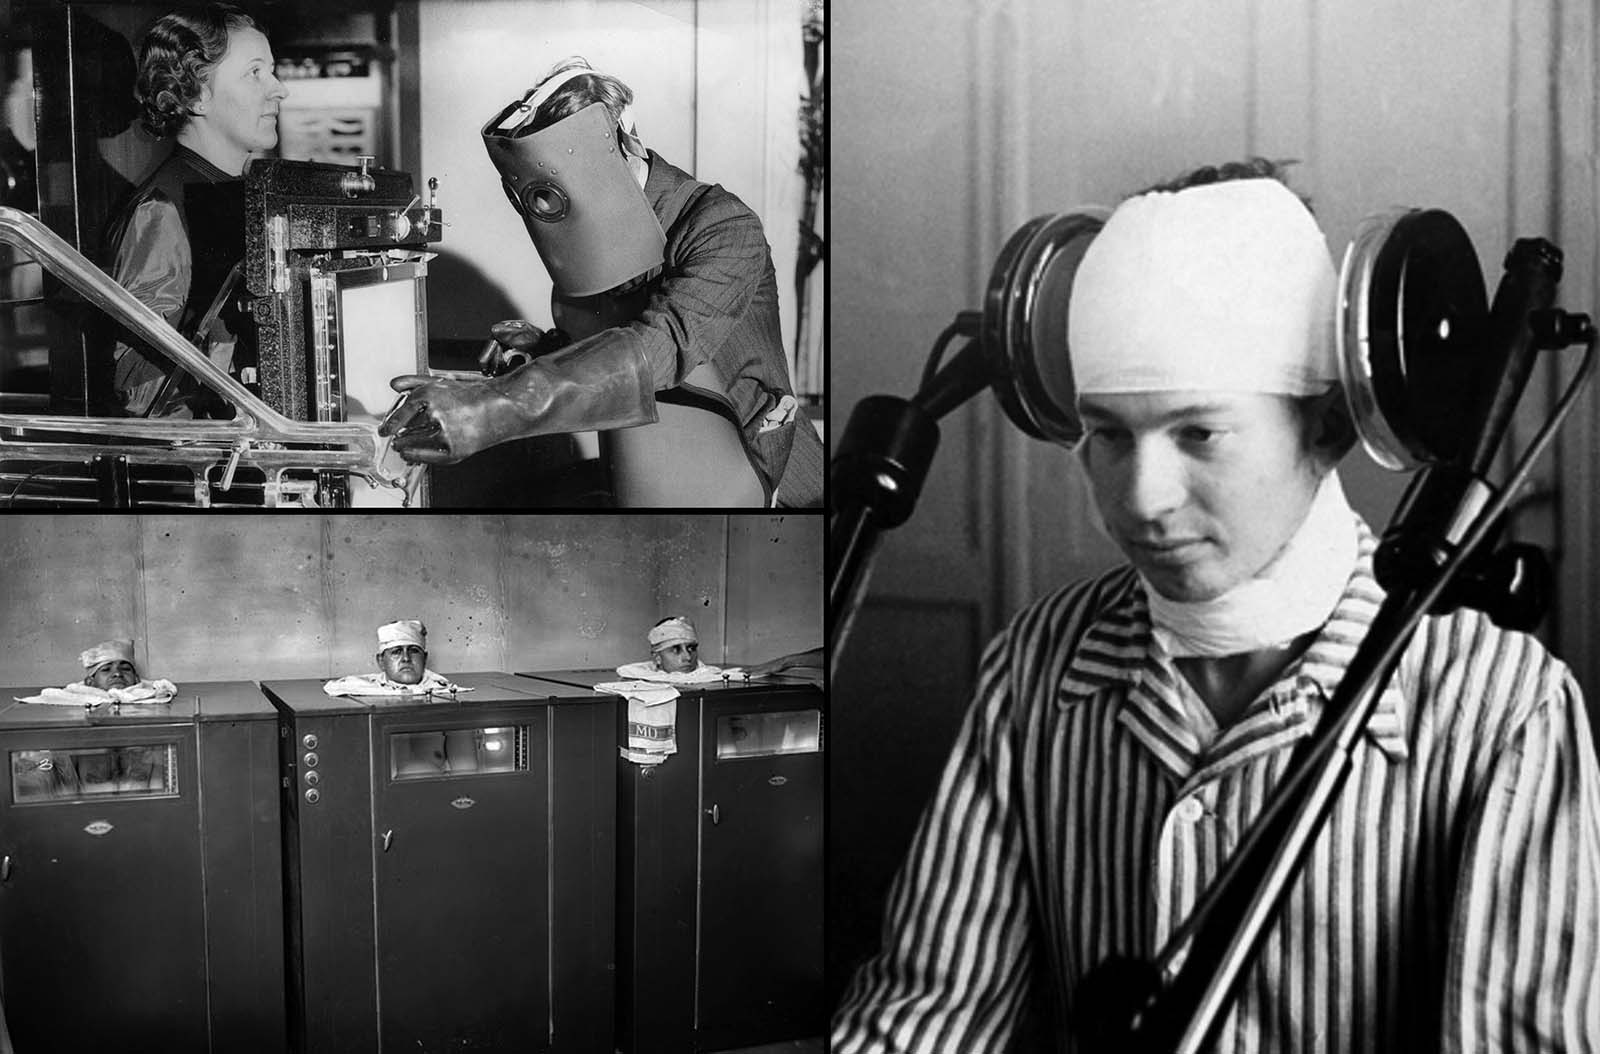 These photos show terrifying and strange medical devices from history, 1900s-1950s